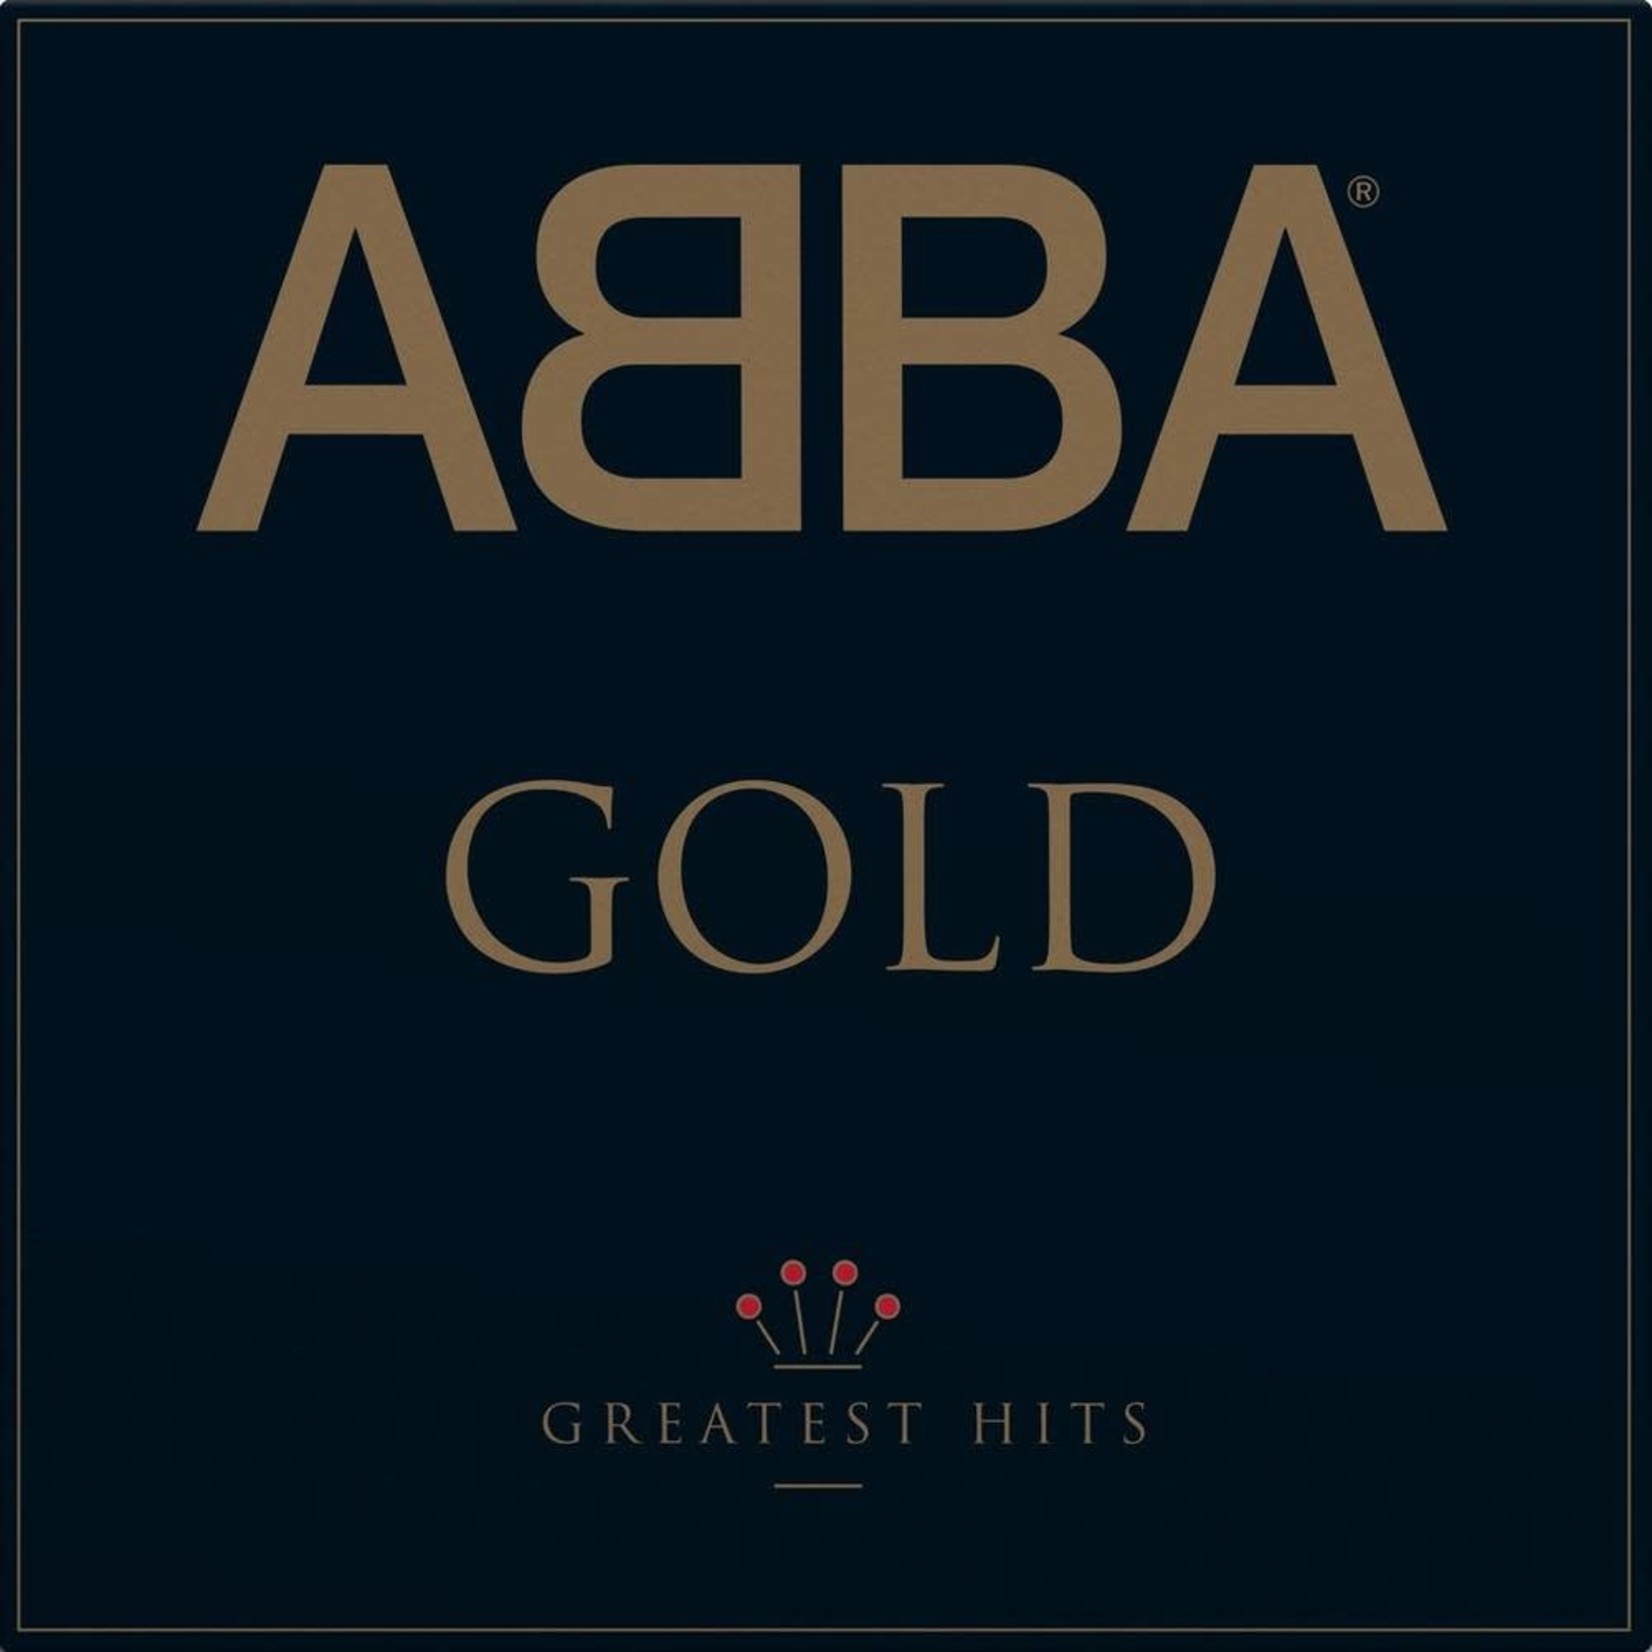 [New] Abba - Gold: Greatest Hits (2LP, gold vinyl, 180g, limited edition)